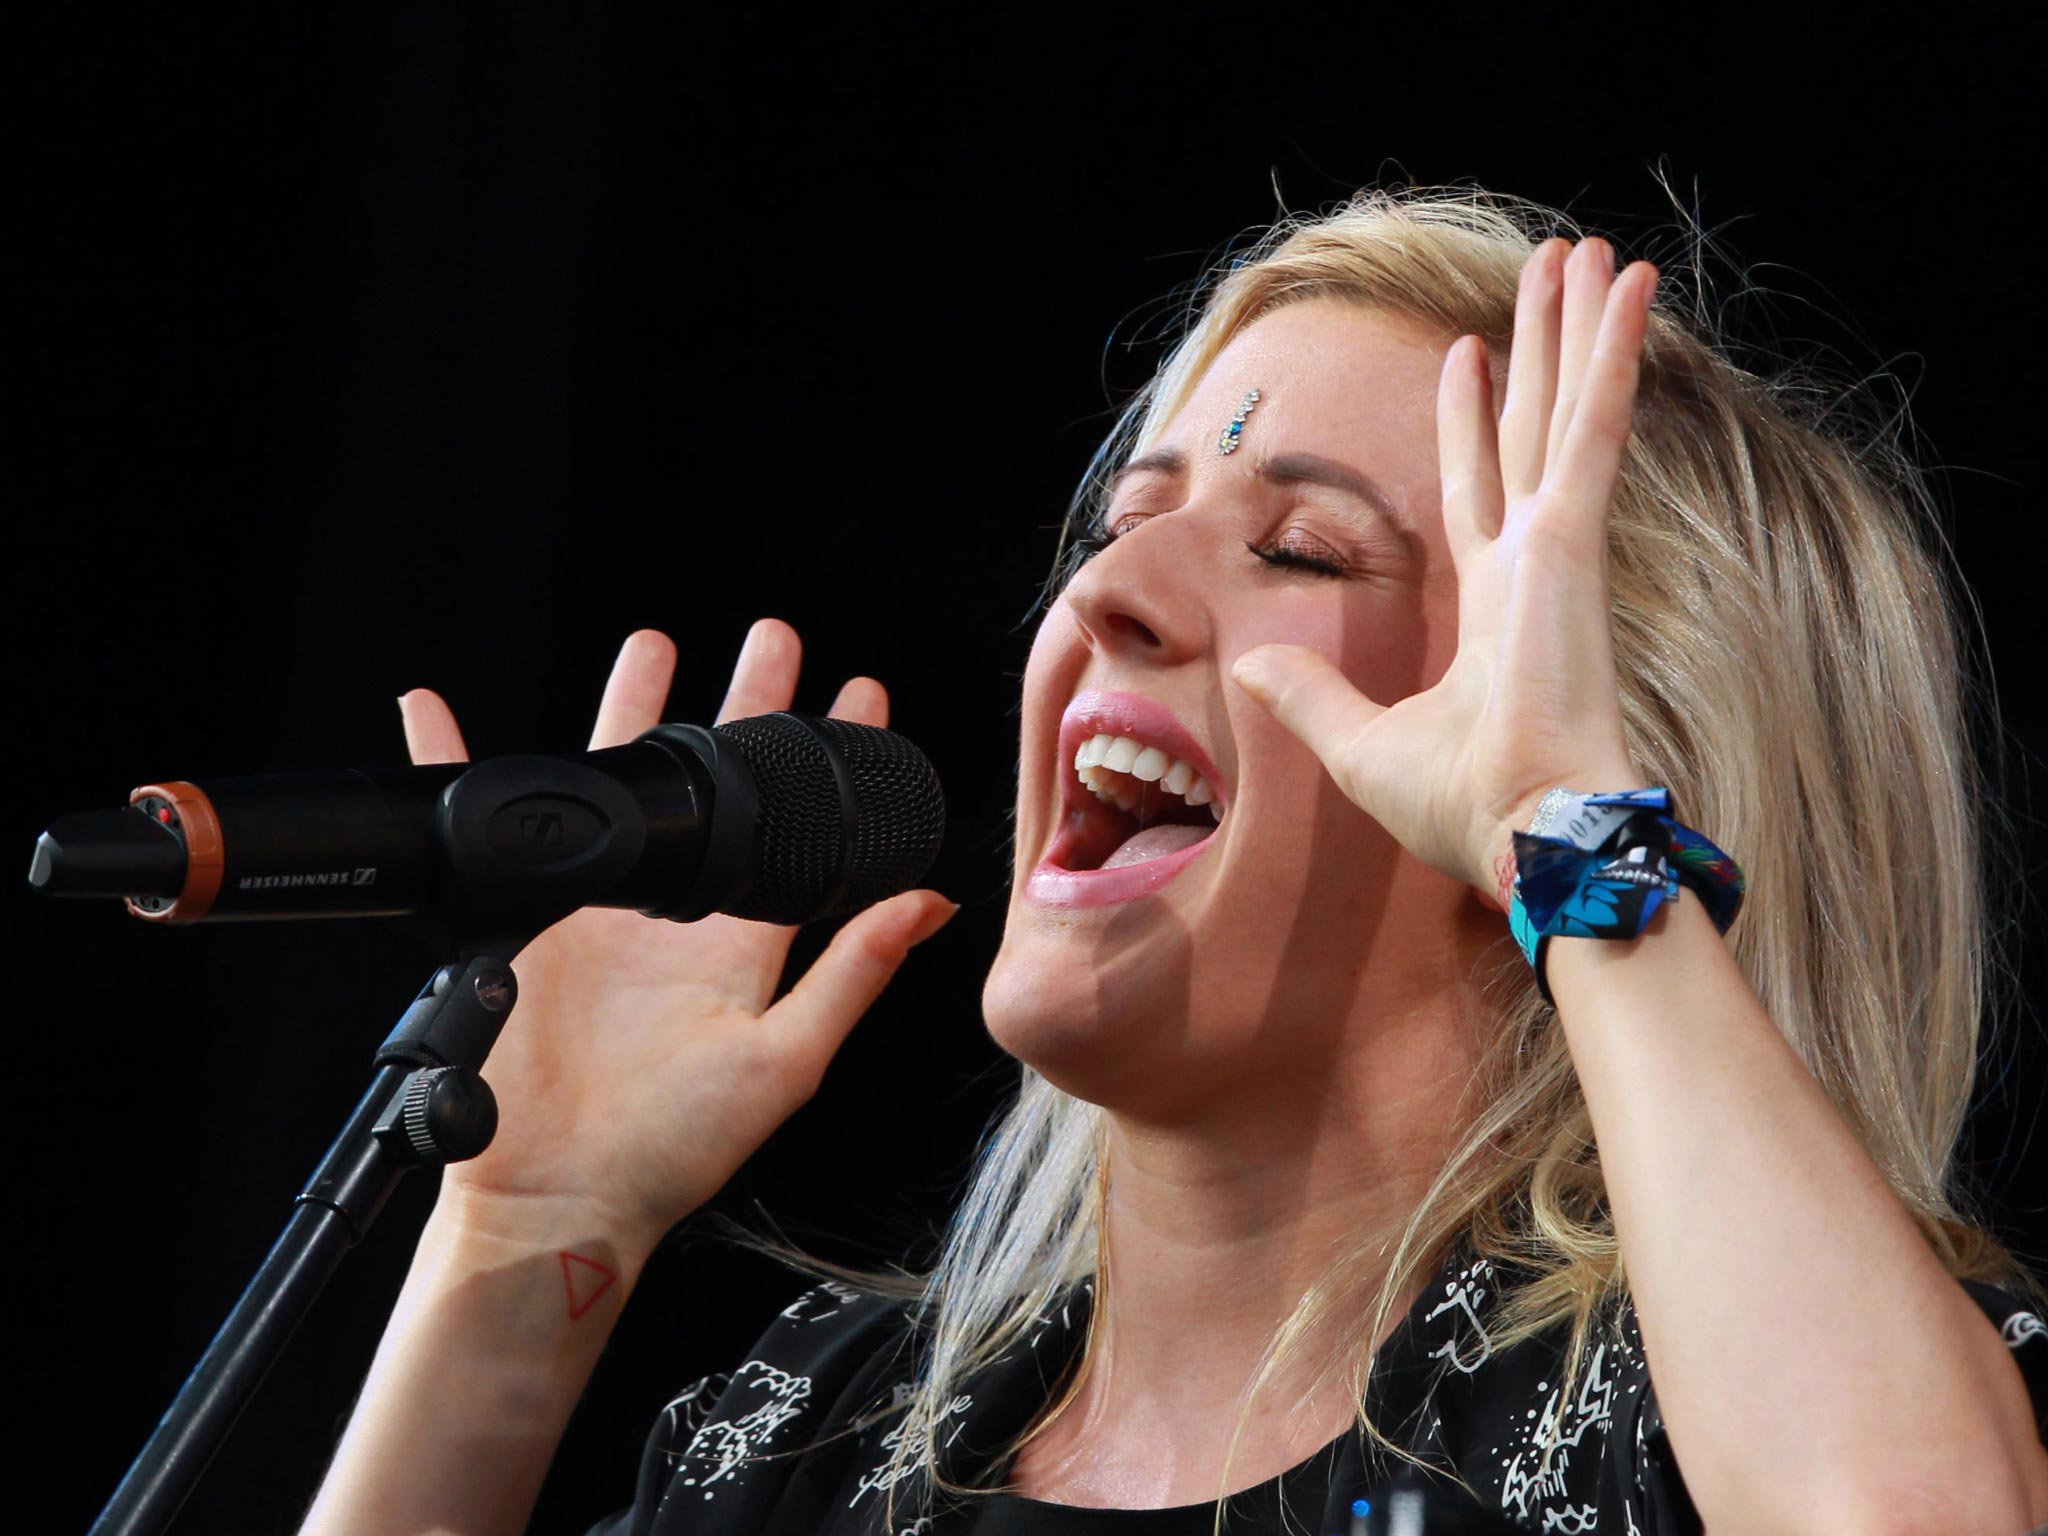 Ellie Goulding performing on the Main Stage at the T in the Park festival